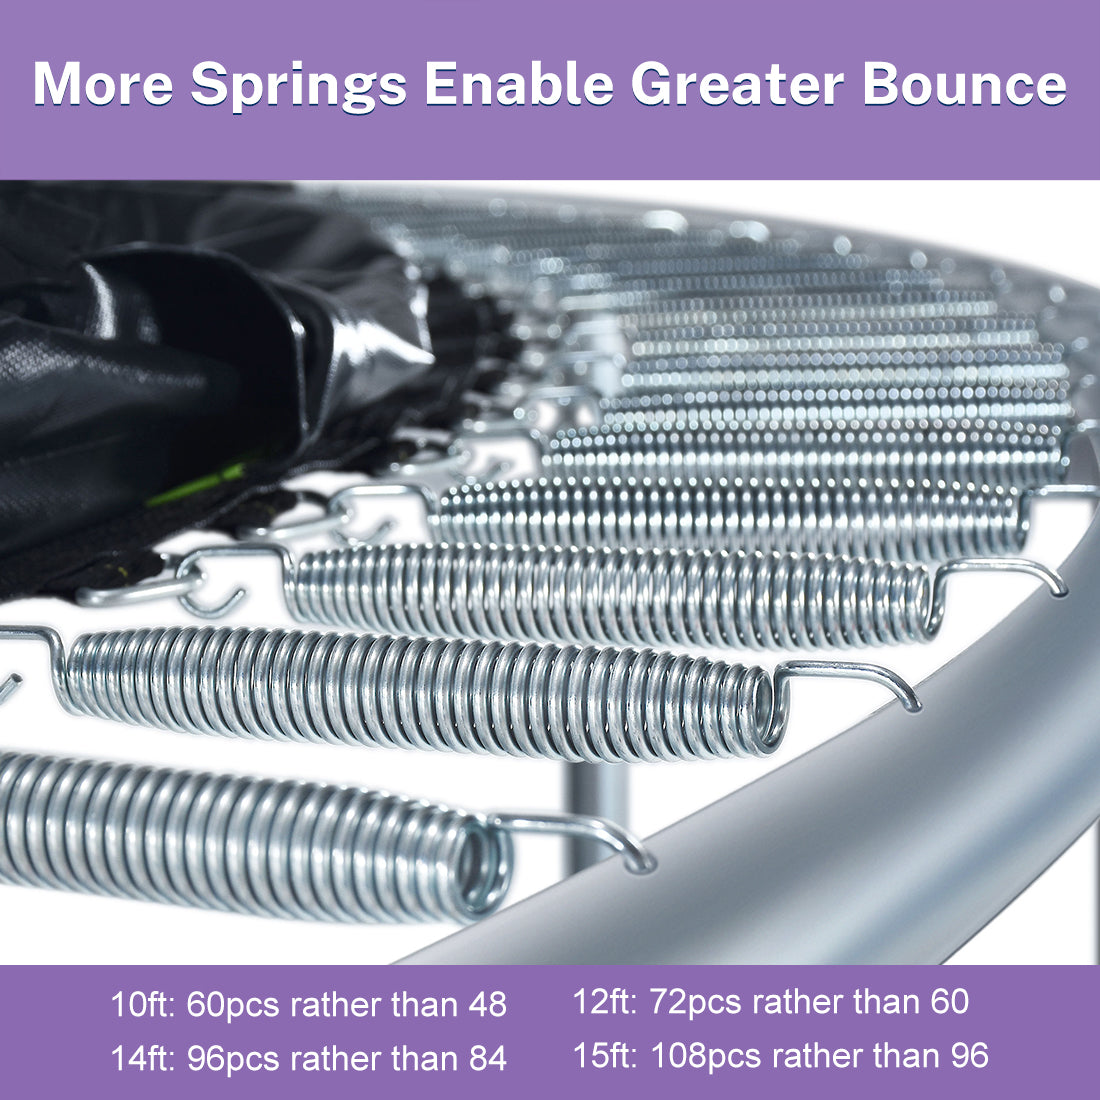 More springs enable greater bounce